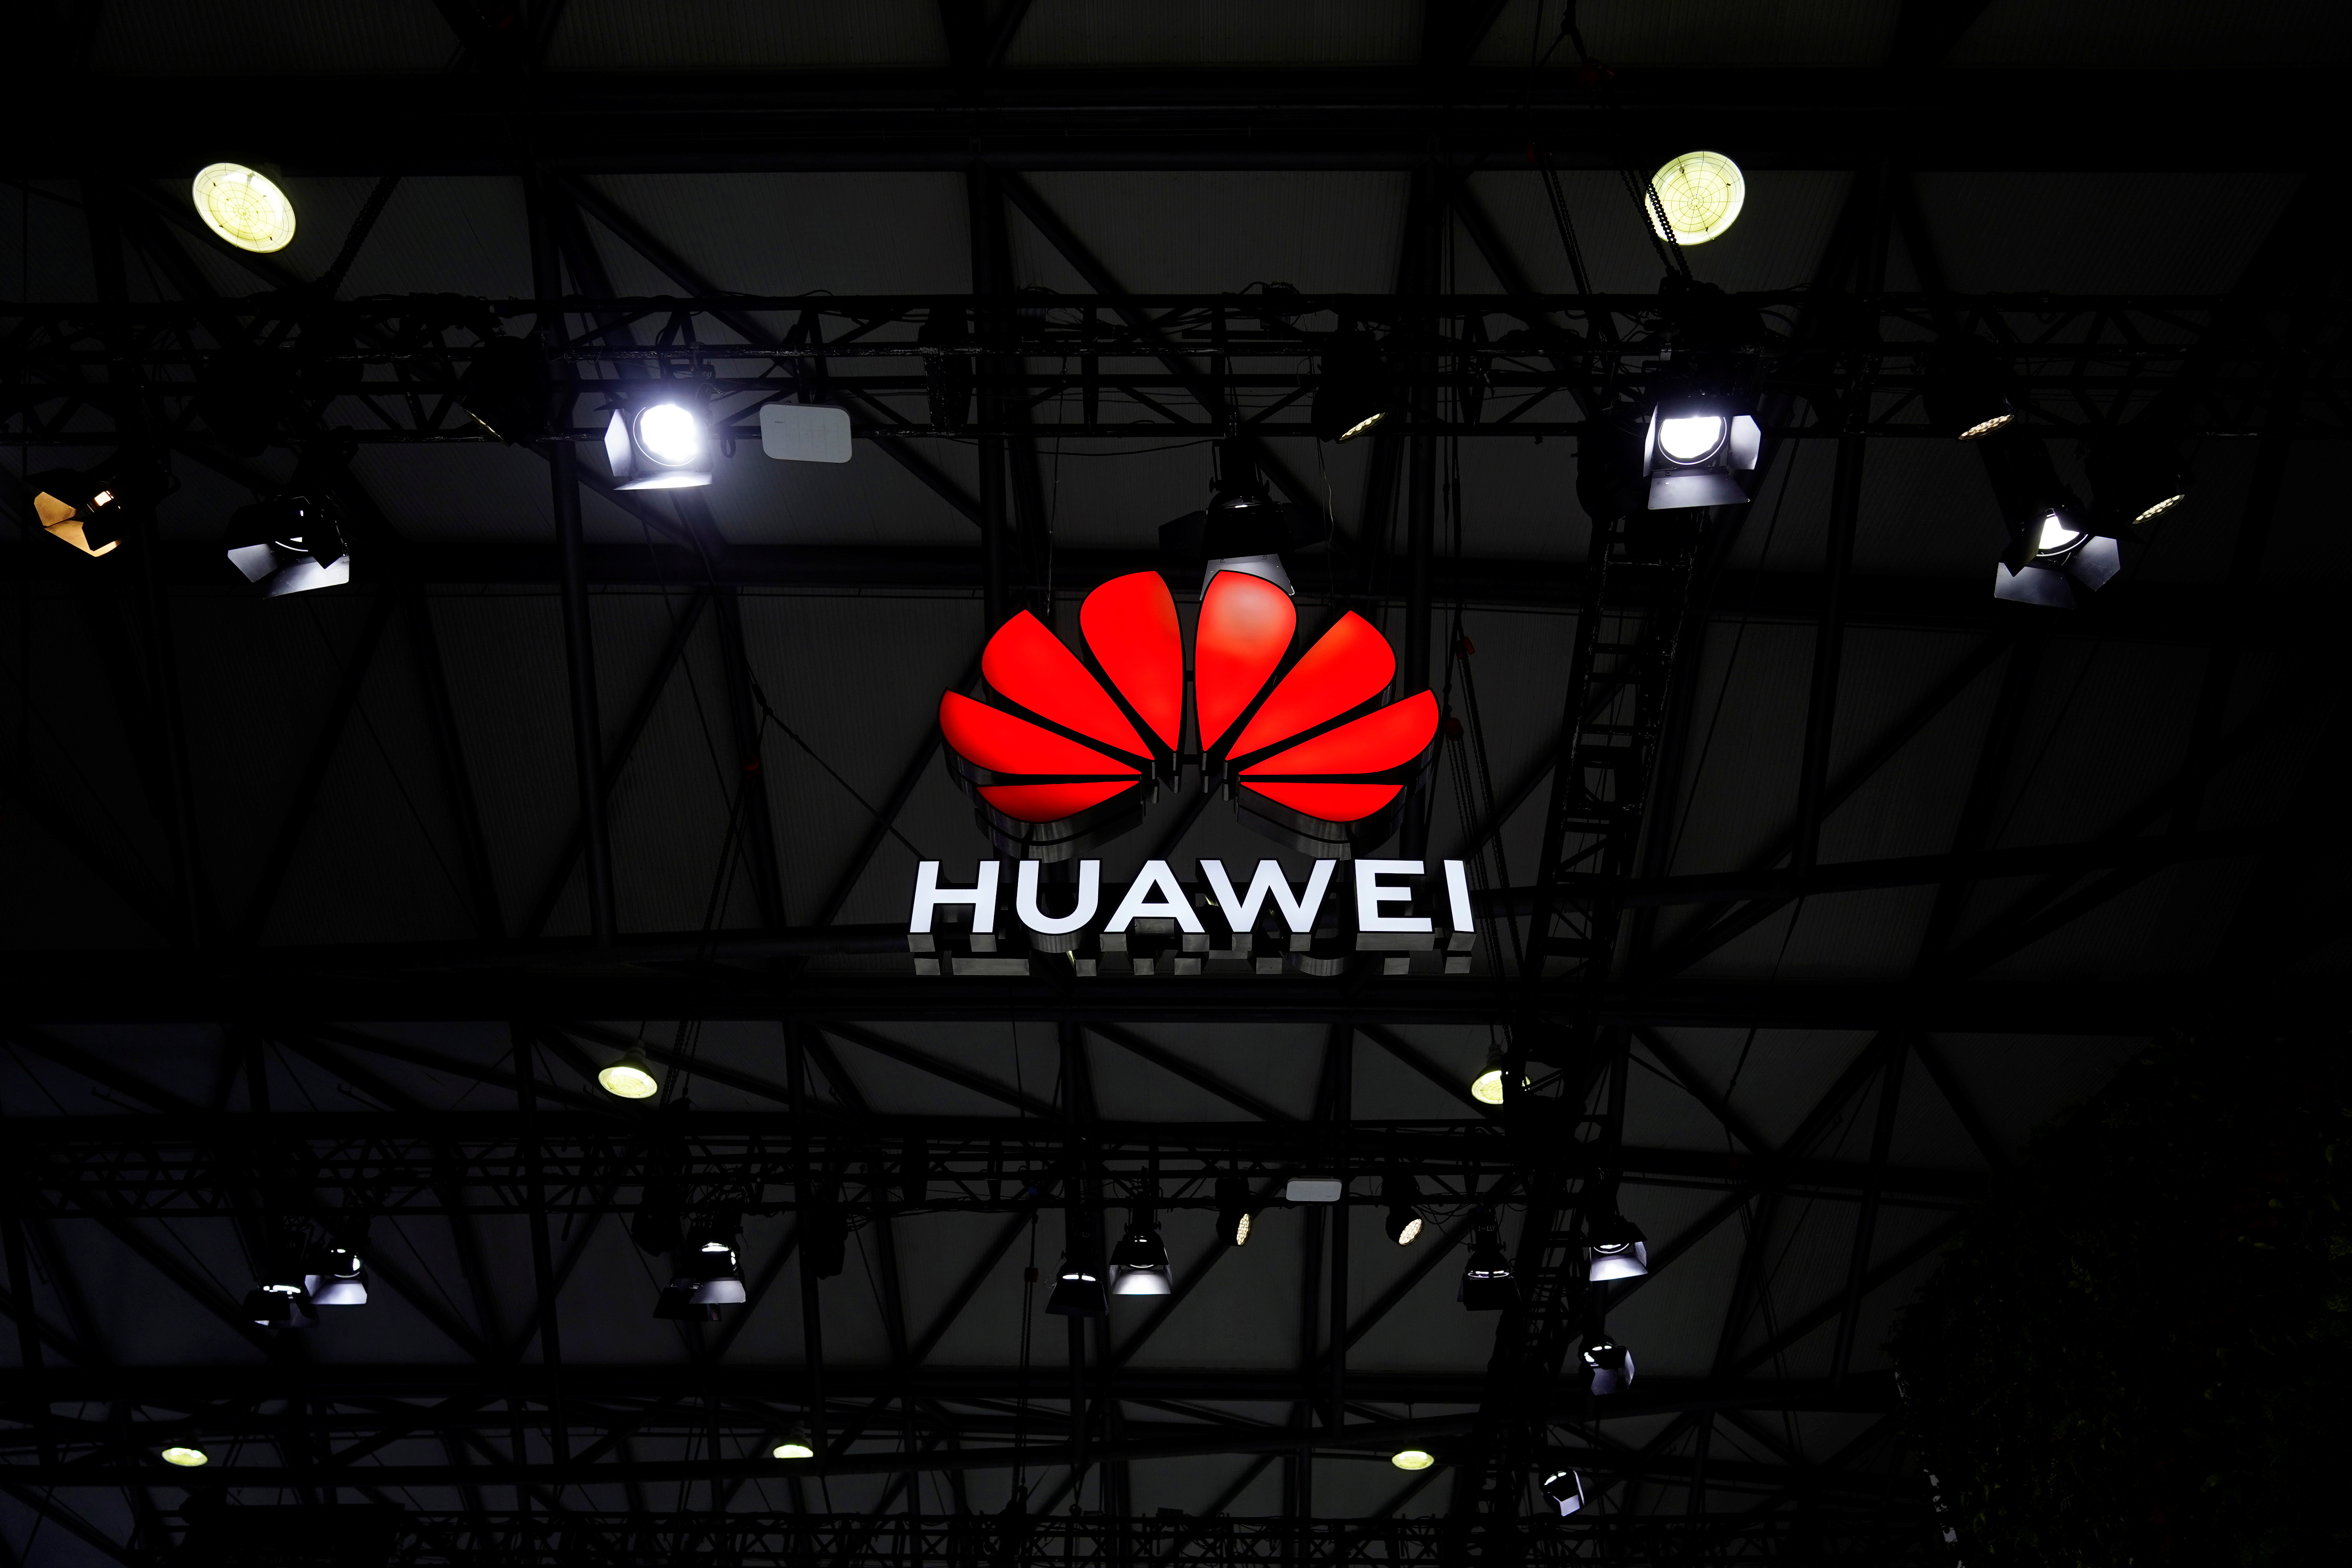 A Huawei logo is seen at the Mobile World Congress (MWC) in Shanghai, China February 23, 2021. REUTERS/Aly Song